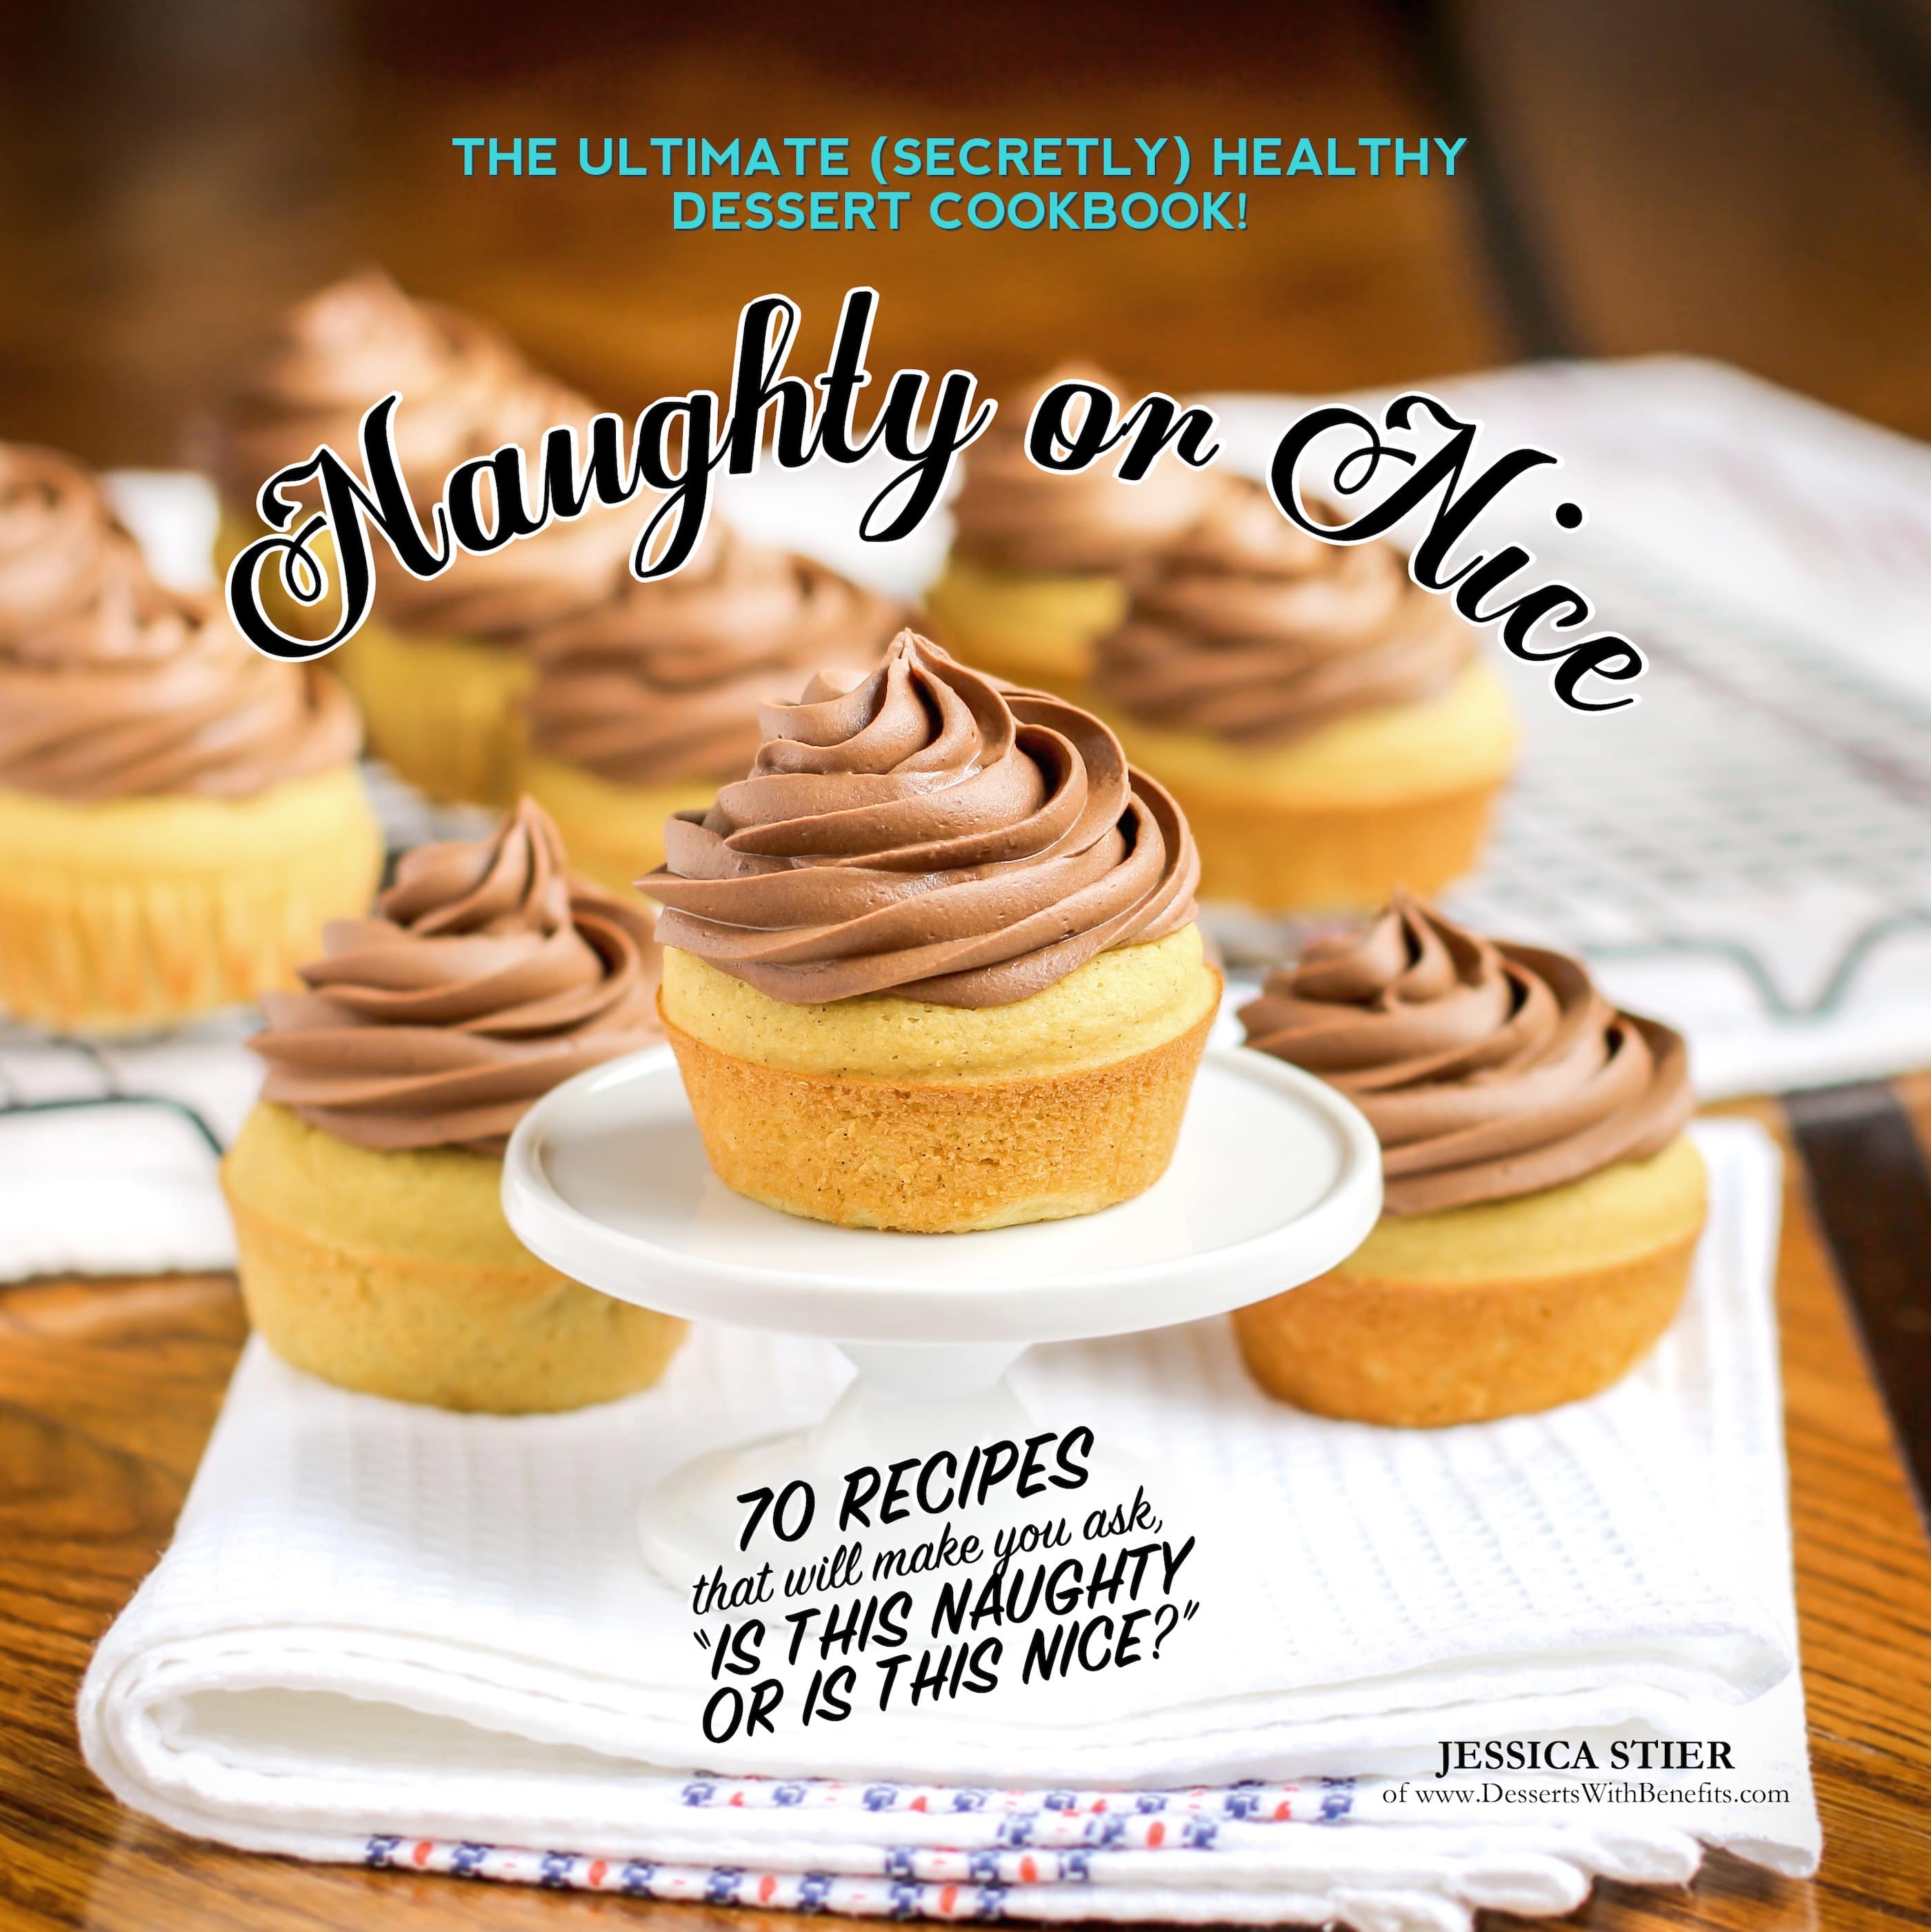 The Naughty or Nice Cookbook is a collection of 70 healthy dessert recipes that will make you ask, “Is this naughty or is this nice?!” From cookies to cakes to ice creams to cheesecakes, you’ll be sure to find a treat you love… and for fewer calories, fat, and carbs, with sugar free, gluten free, dairy free, and vegan options!